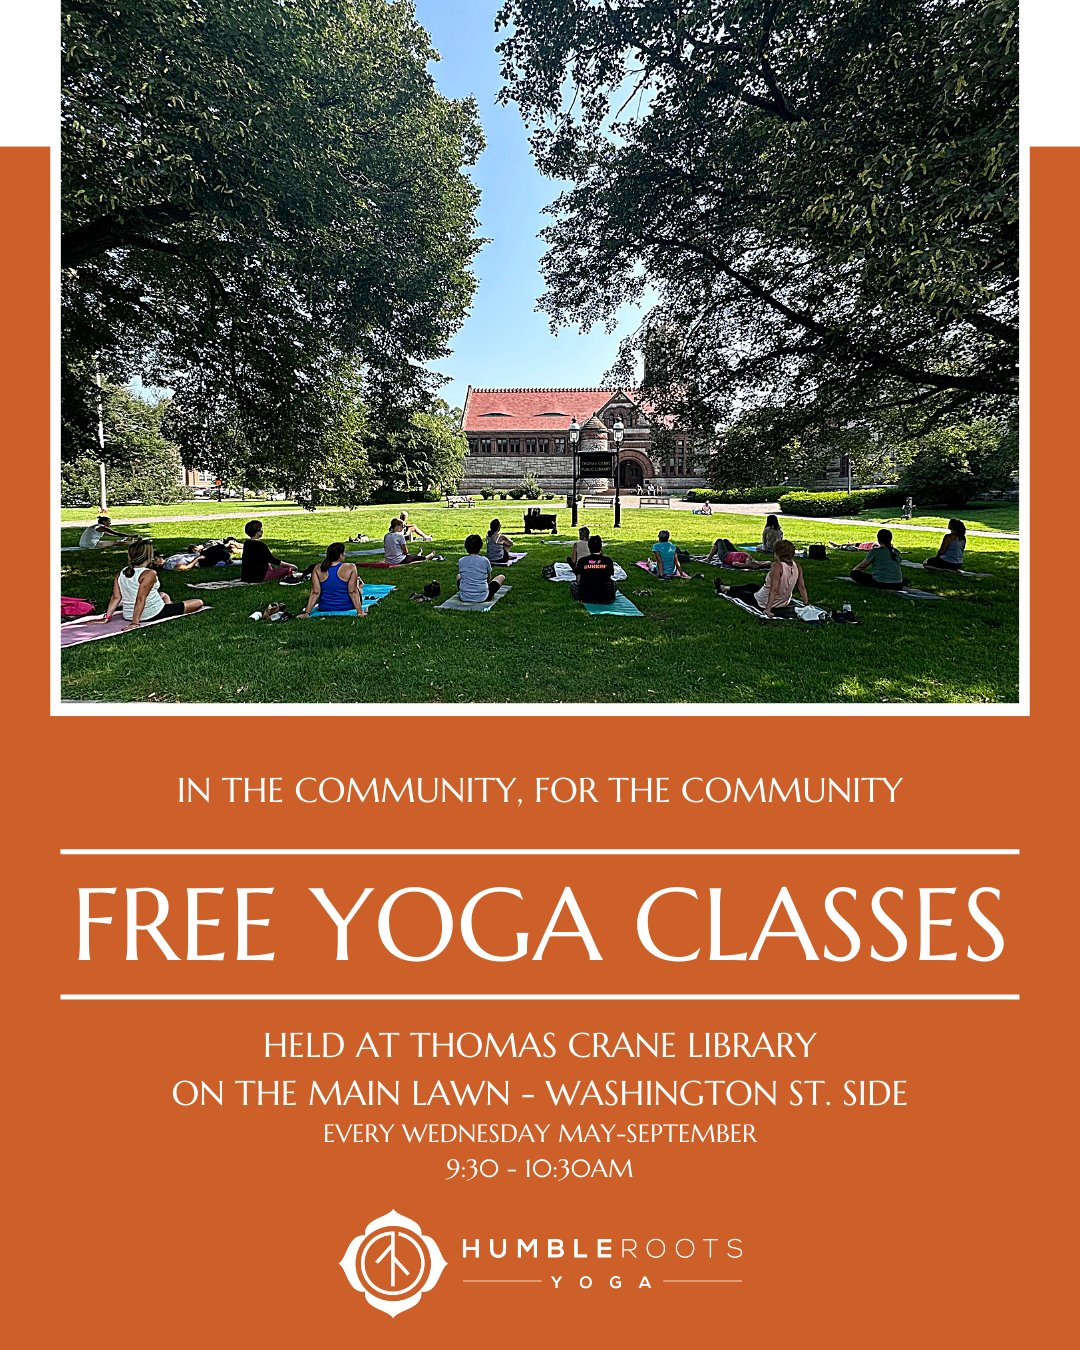 Humble Roots Yoga poster for free yoga classes from May to September 2023 at the Thomas Crane Library